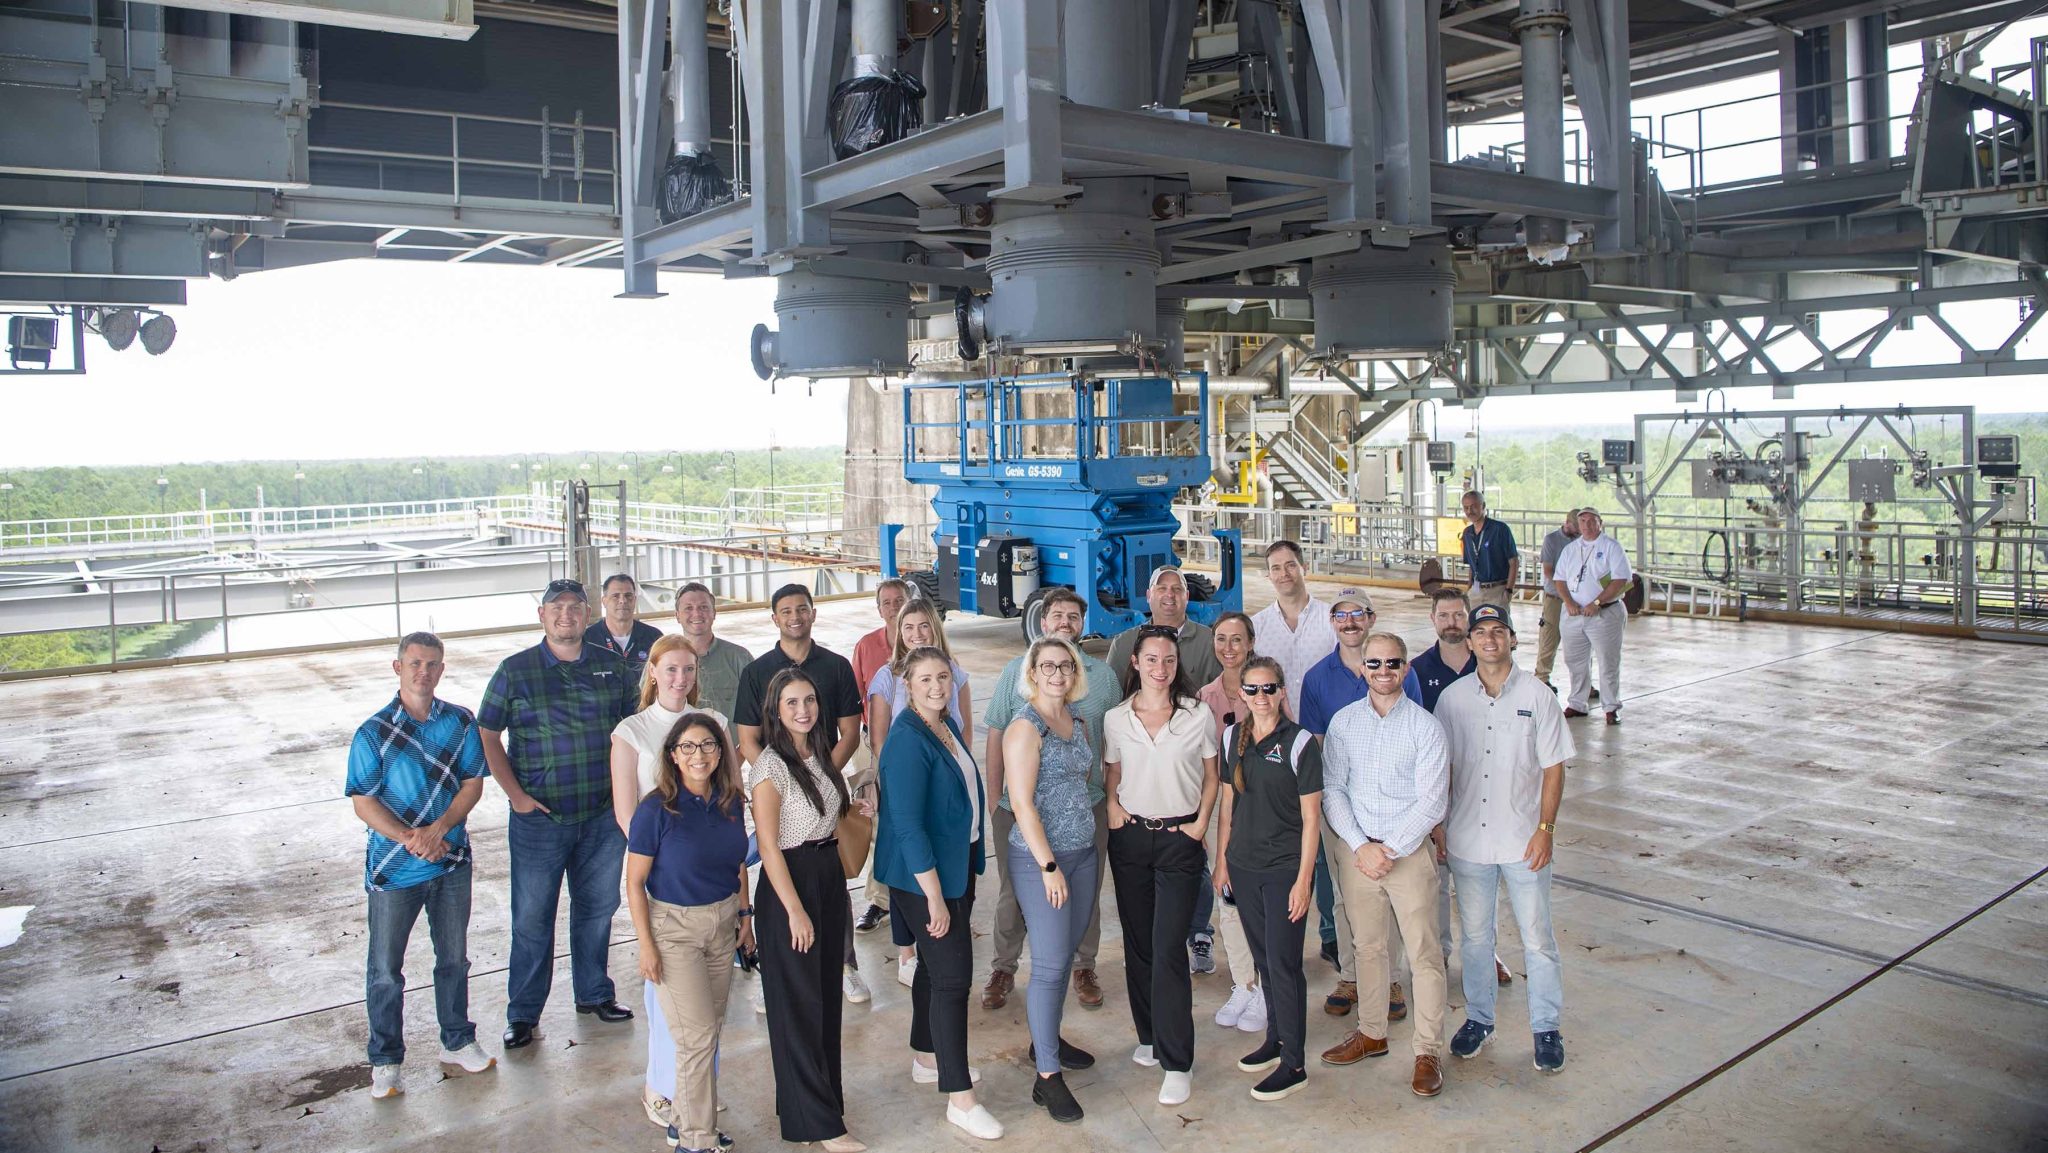 Congressional staff delegates representing eight states along with NASA and U.S. Air Force representatives pose for a photo while visiting the Thad Cochran Test Stand